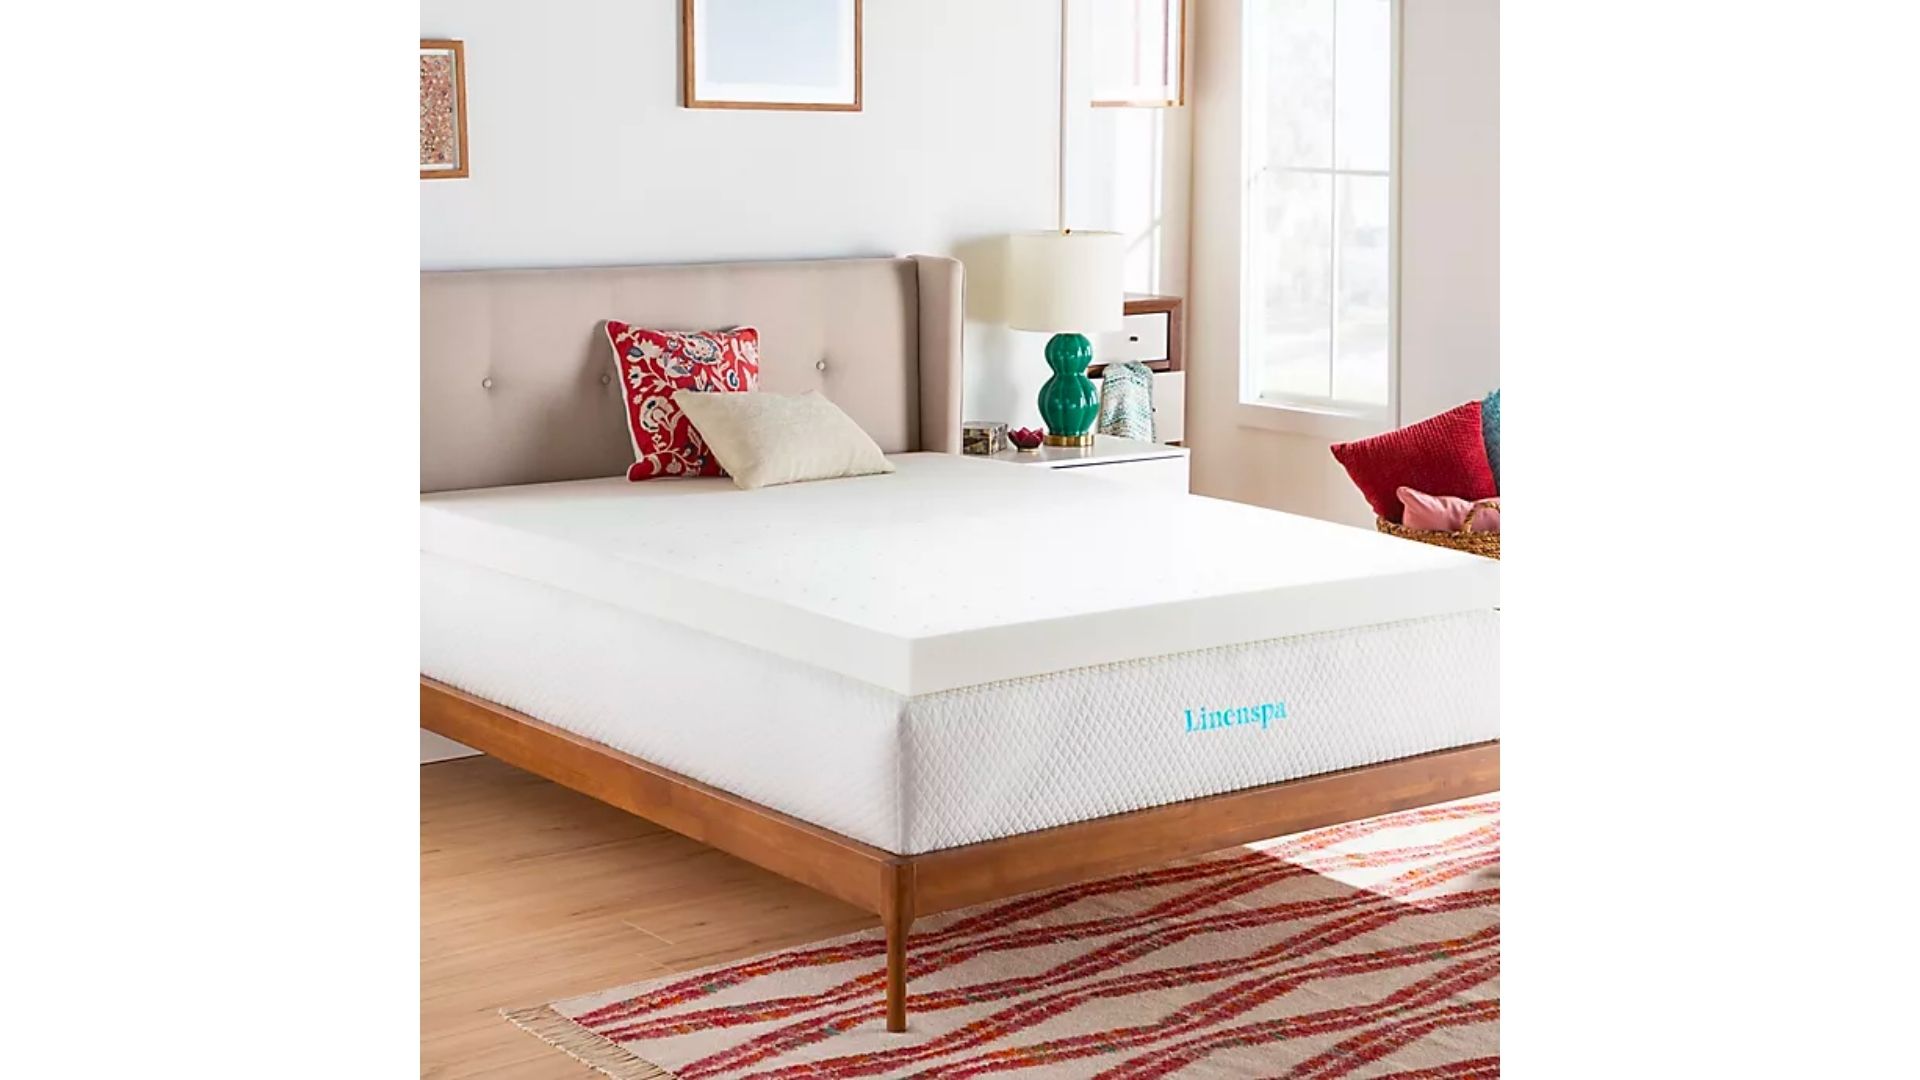 Best mattress toppers for a heavy person